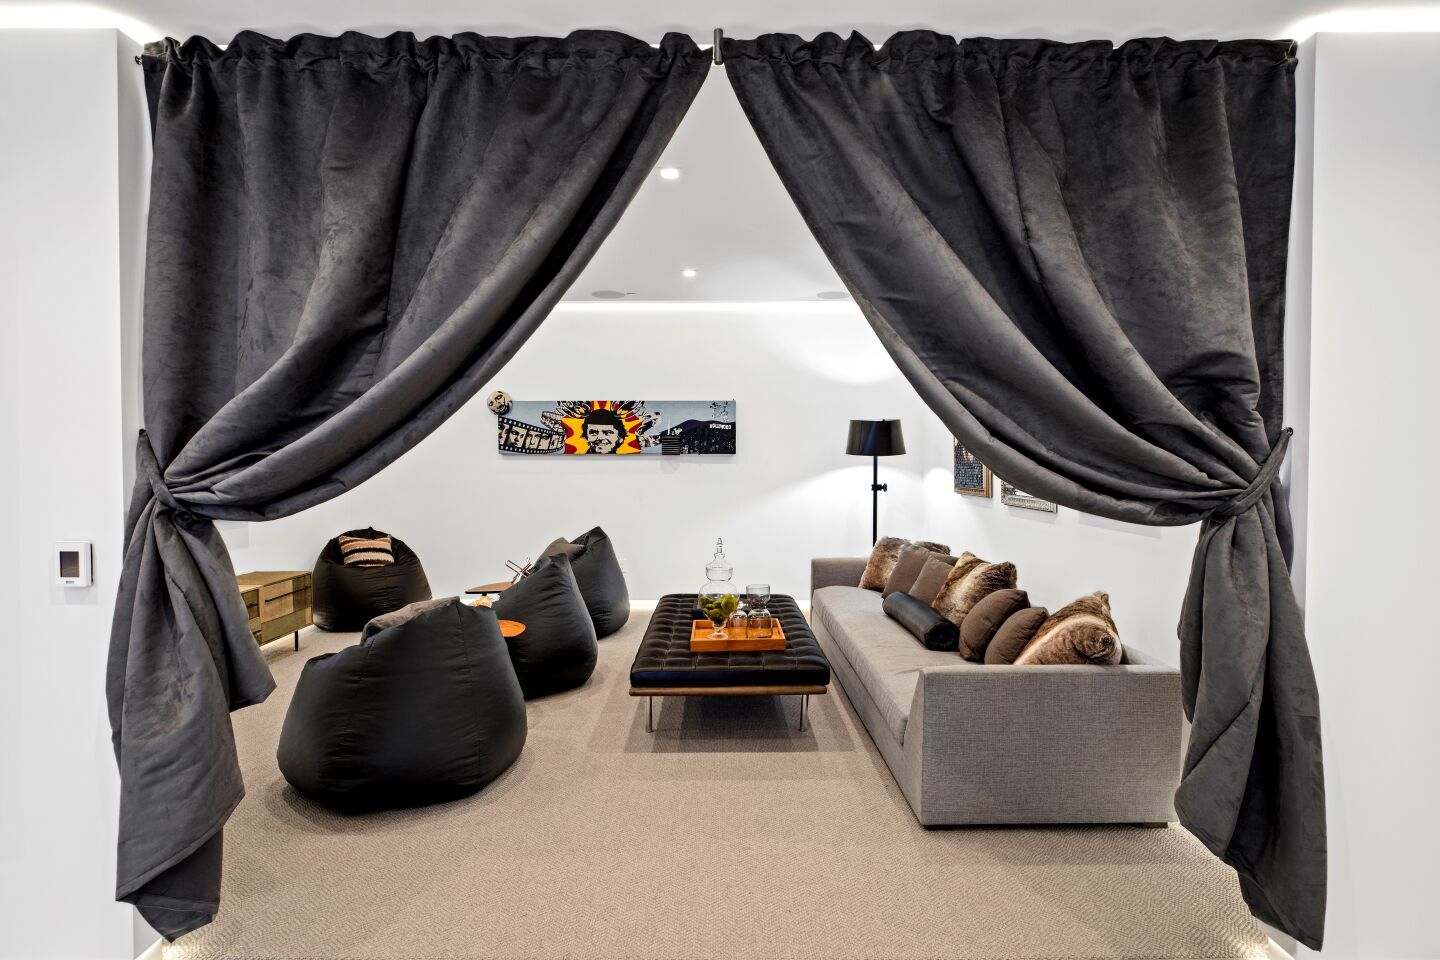 Gray curtains are pulled back on the movie room, which holds a long couch and low chairs.